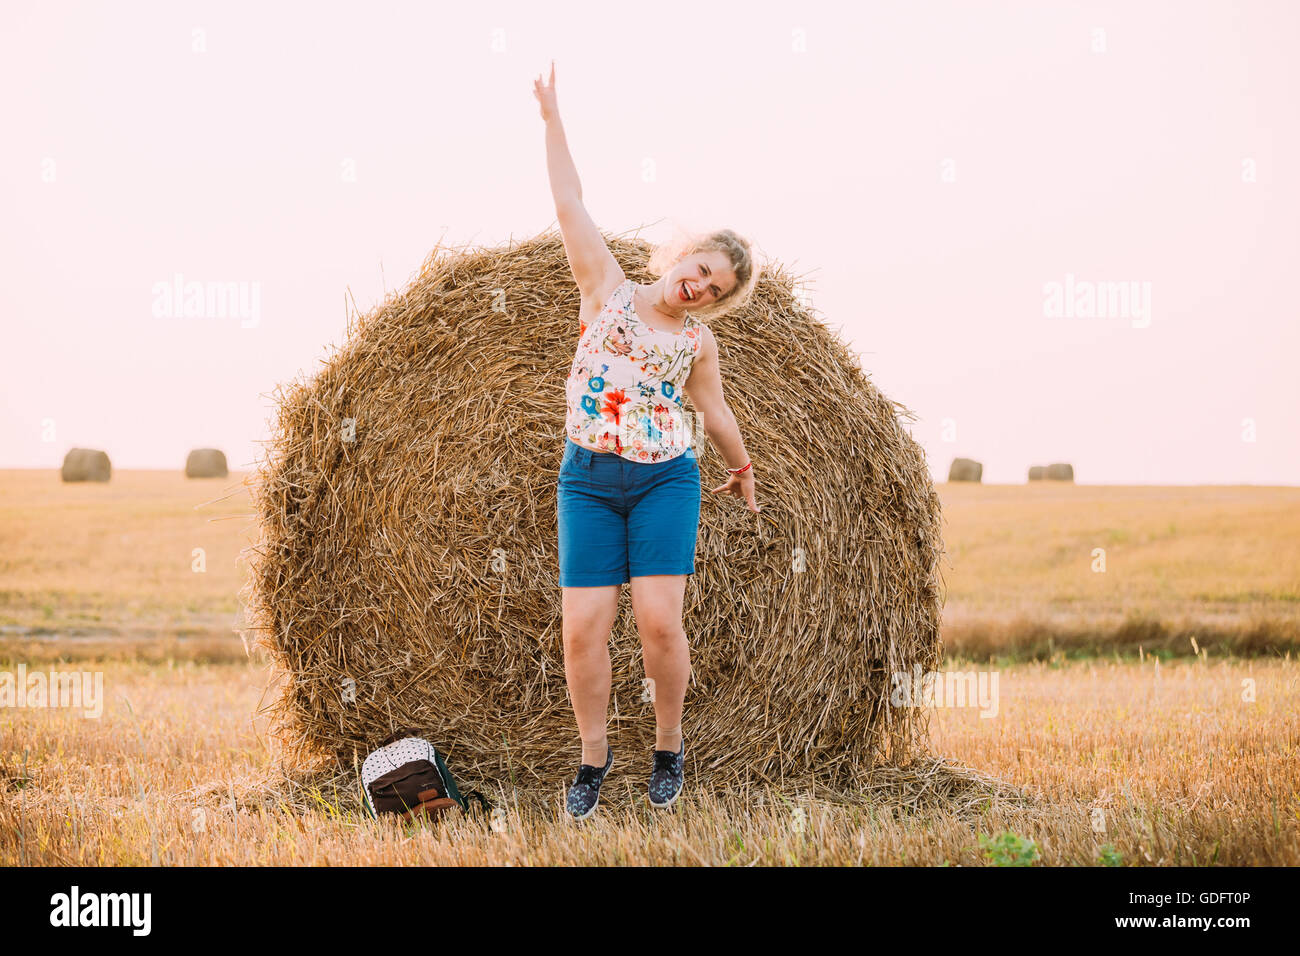 Beautiful Plus Size Young Woman Girl Jumping Near Haystack With His Hand Up And Smiling. Sunset Of The Day In Summer Field Meado Stock Photo